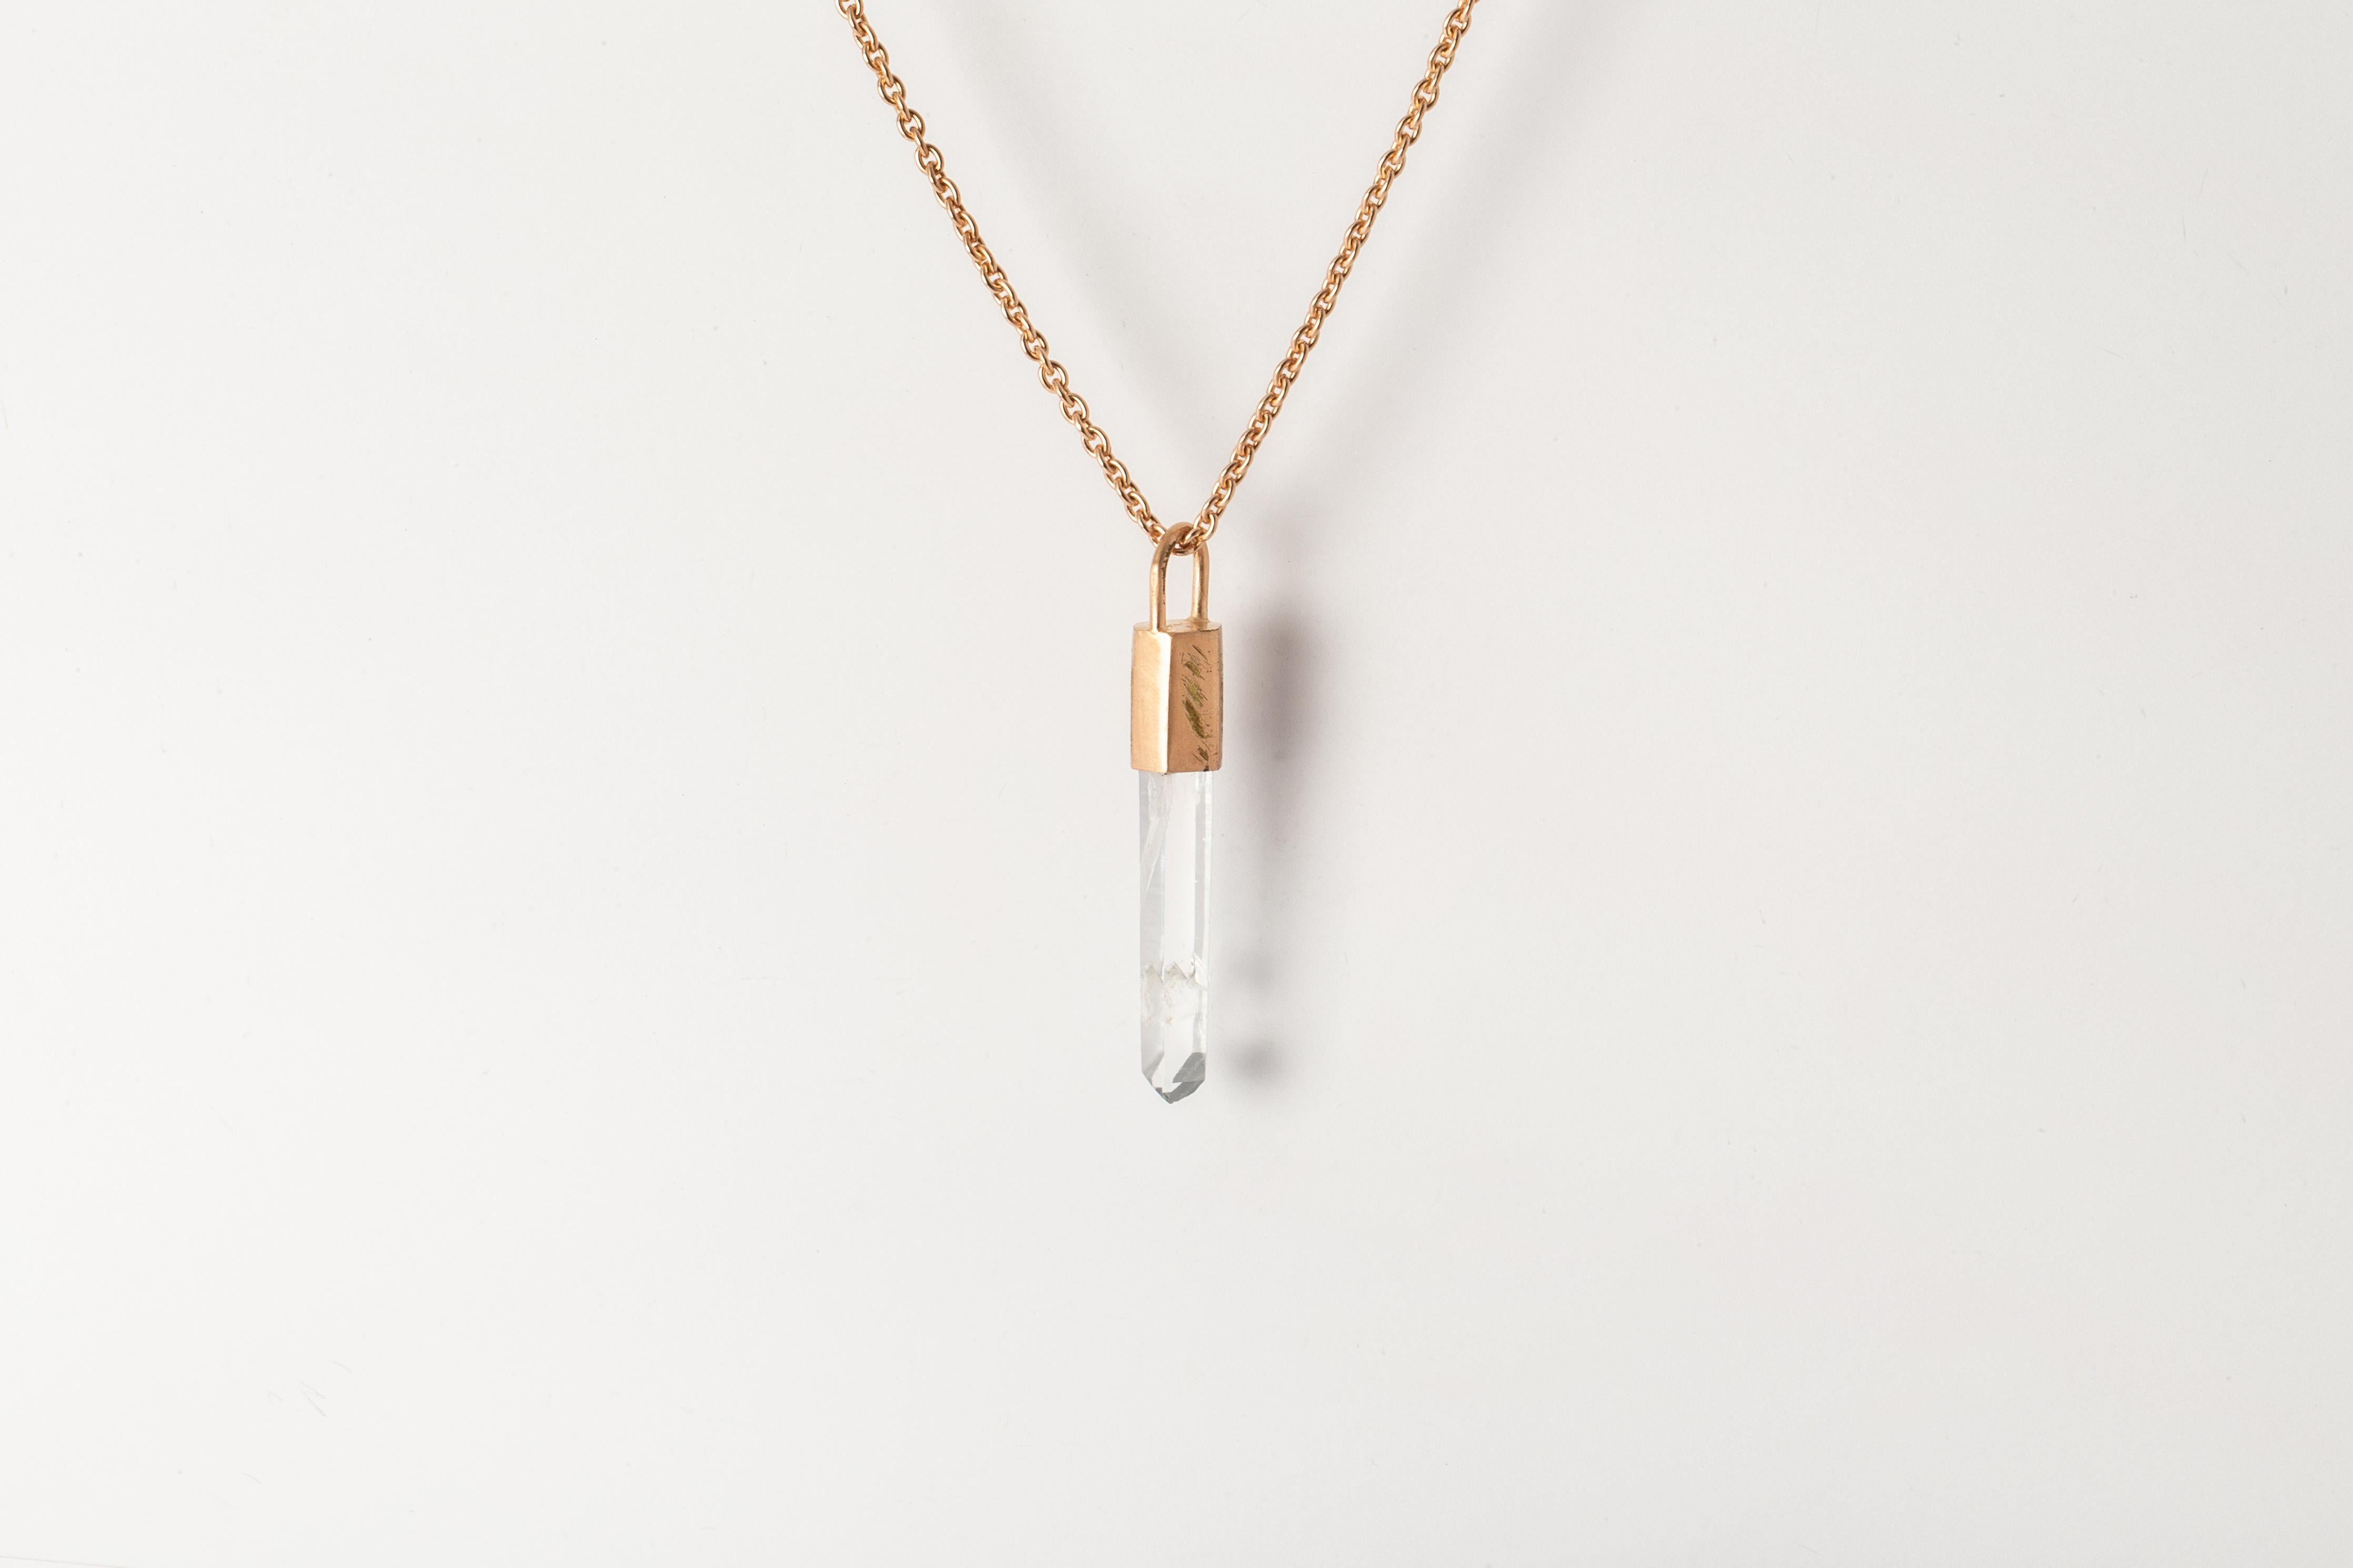 Pendant necklace in brass, sterling silver, and a rough of lemurian quartz. Brass and sterling silver substrates are electroplated with 18k rose gold and then dipped into acid to create the subtly destroyed surface.
The Talisman series is an